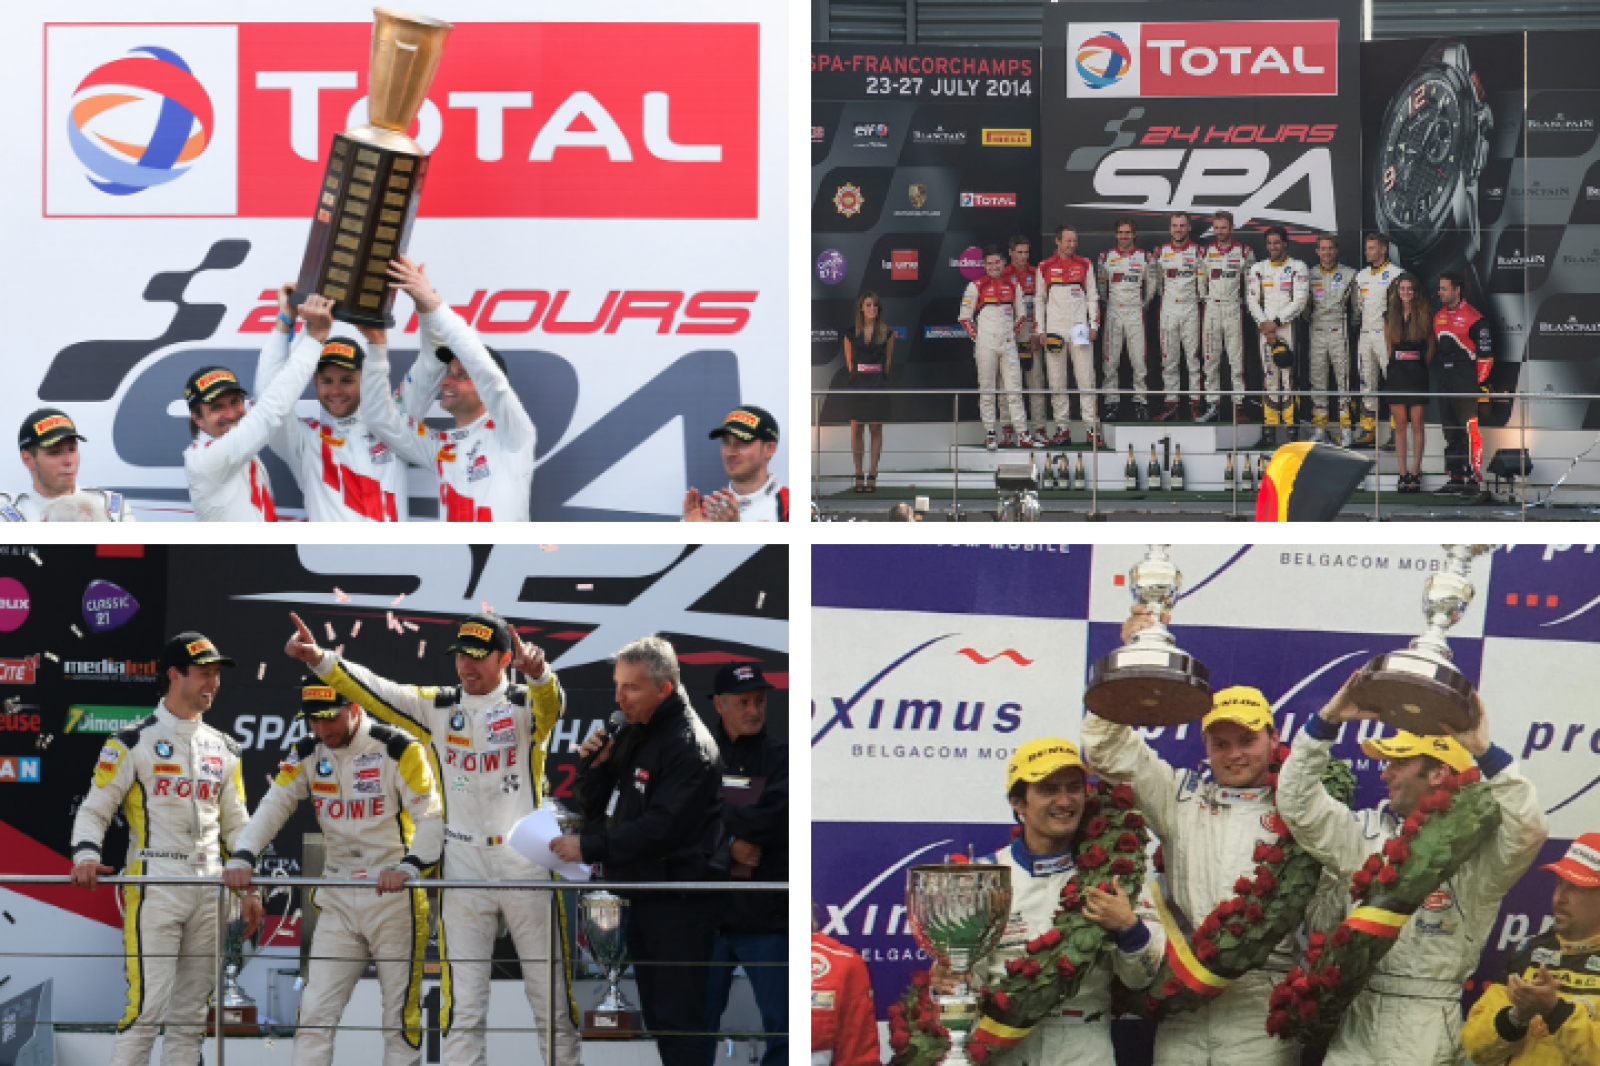 Total 24 Hours of Spa winners take us behind the scenes of the world’s toughest GT race